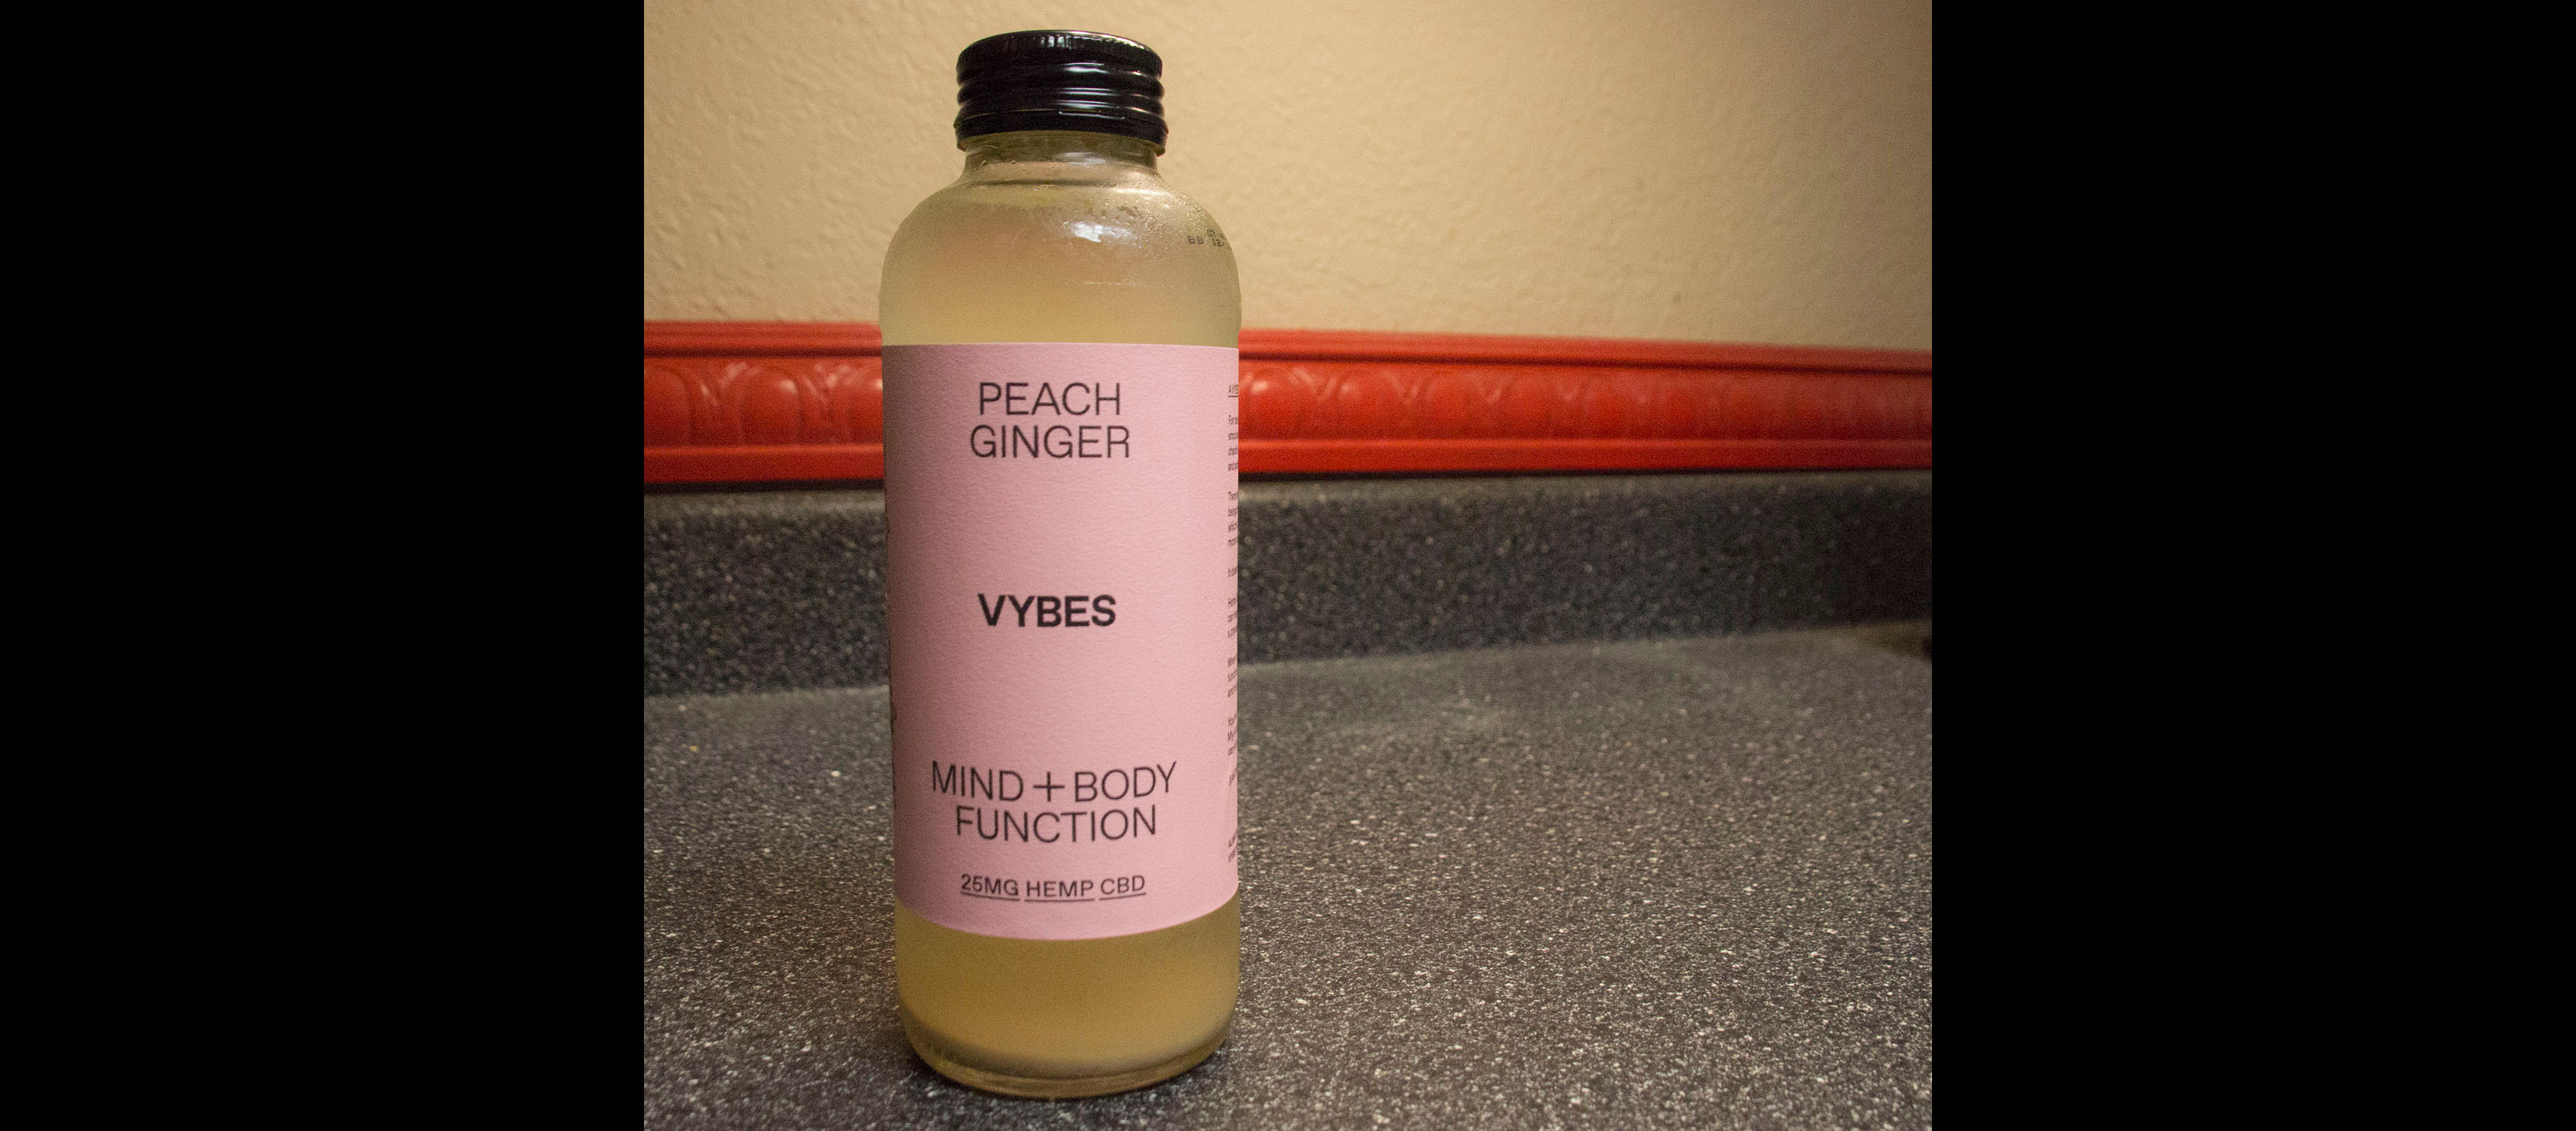 Peach, ginger and a dash of hemp cannabidiol: Reviewing a Vybes beverage